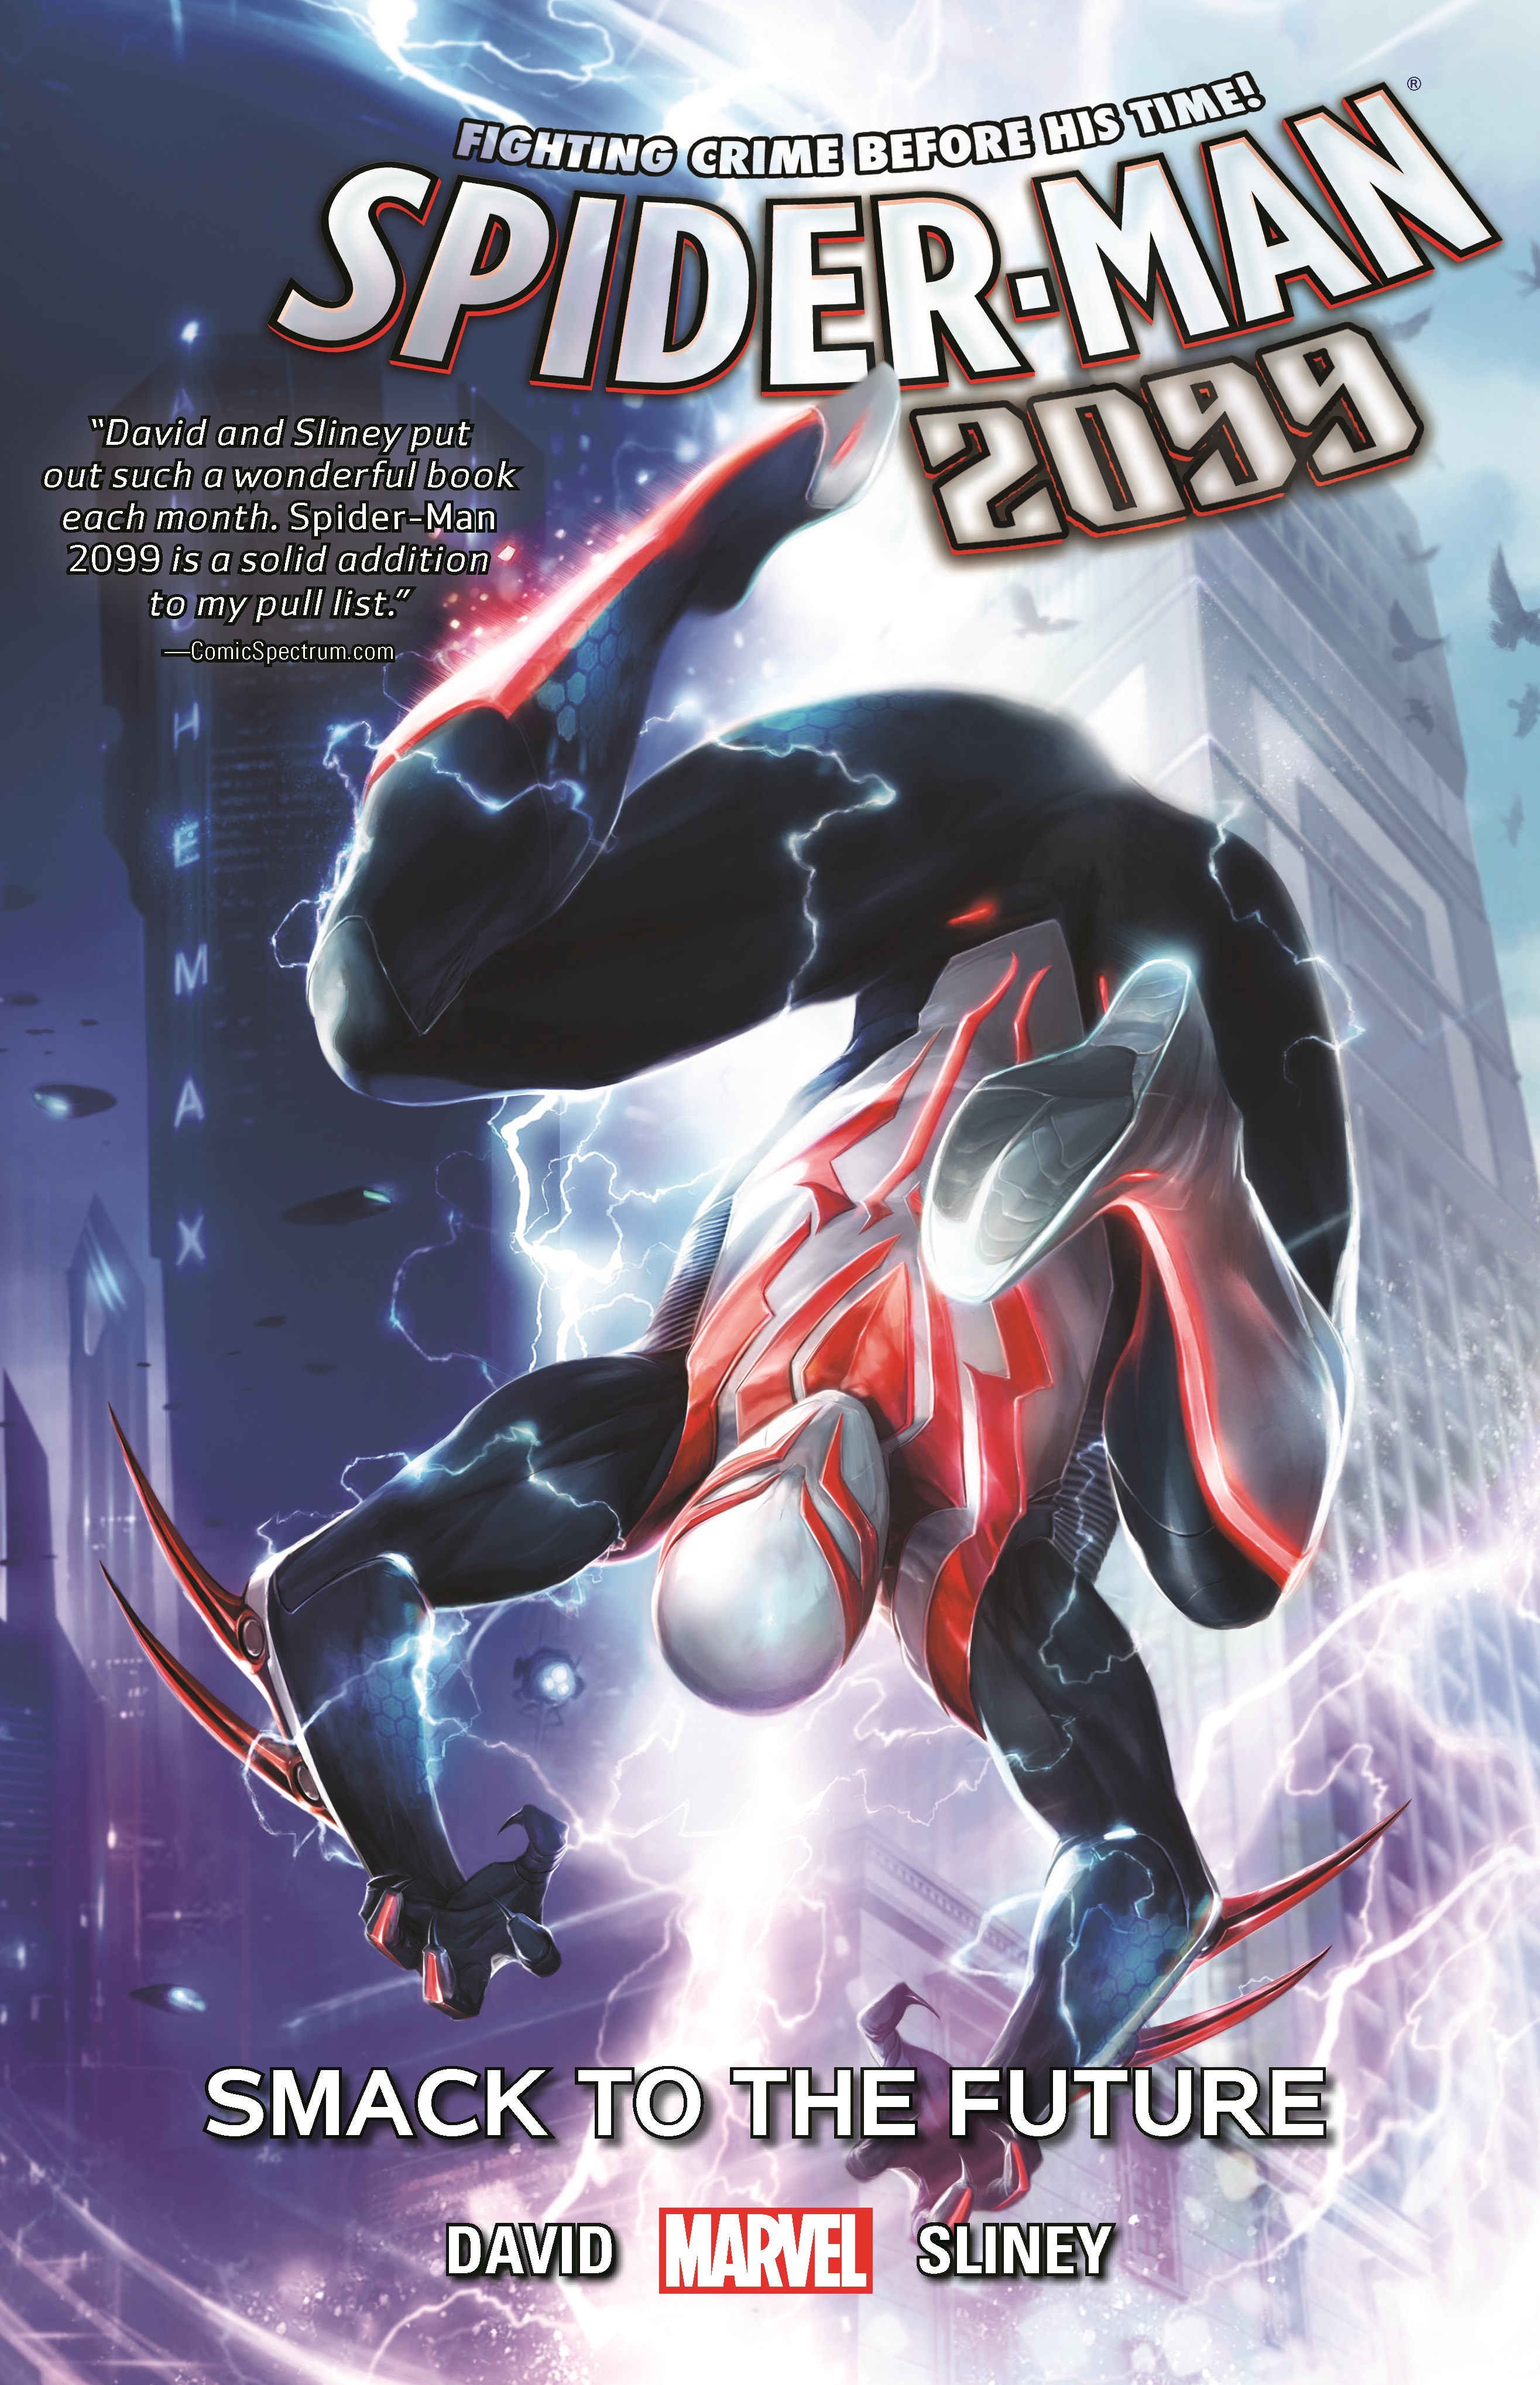 Spider-Man 2099 Vol. 3: Smack to The Future (Trade Paperback)